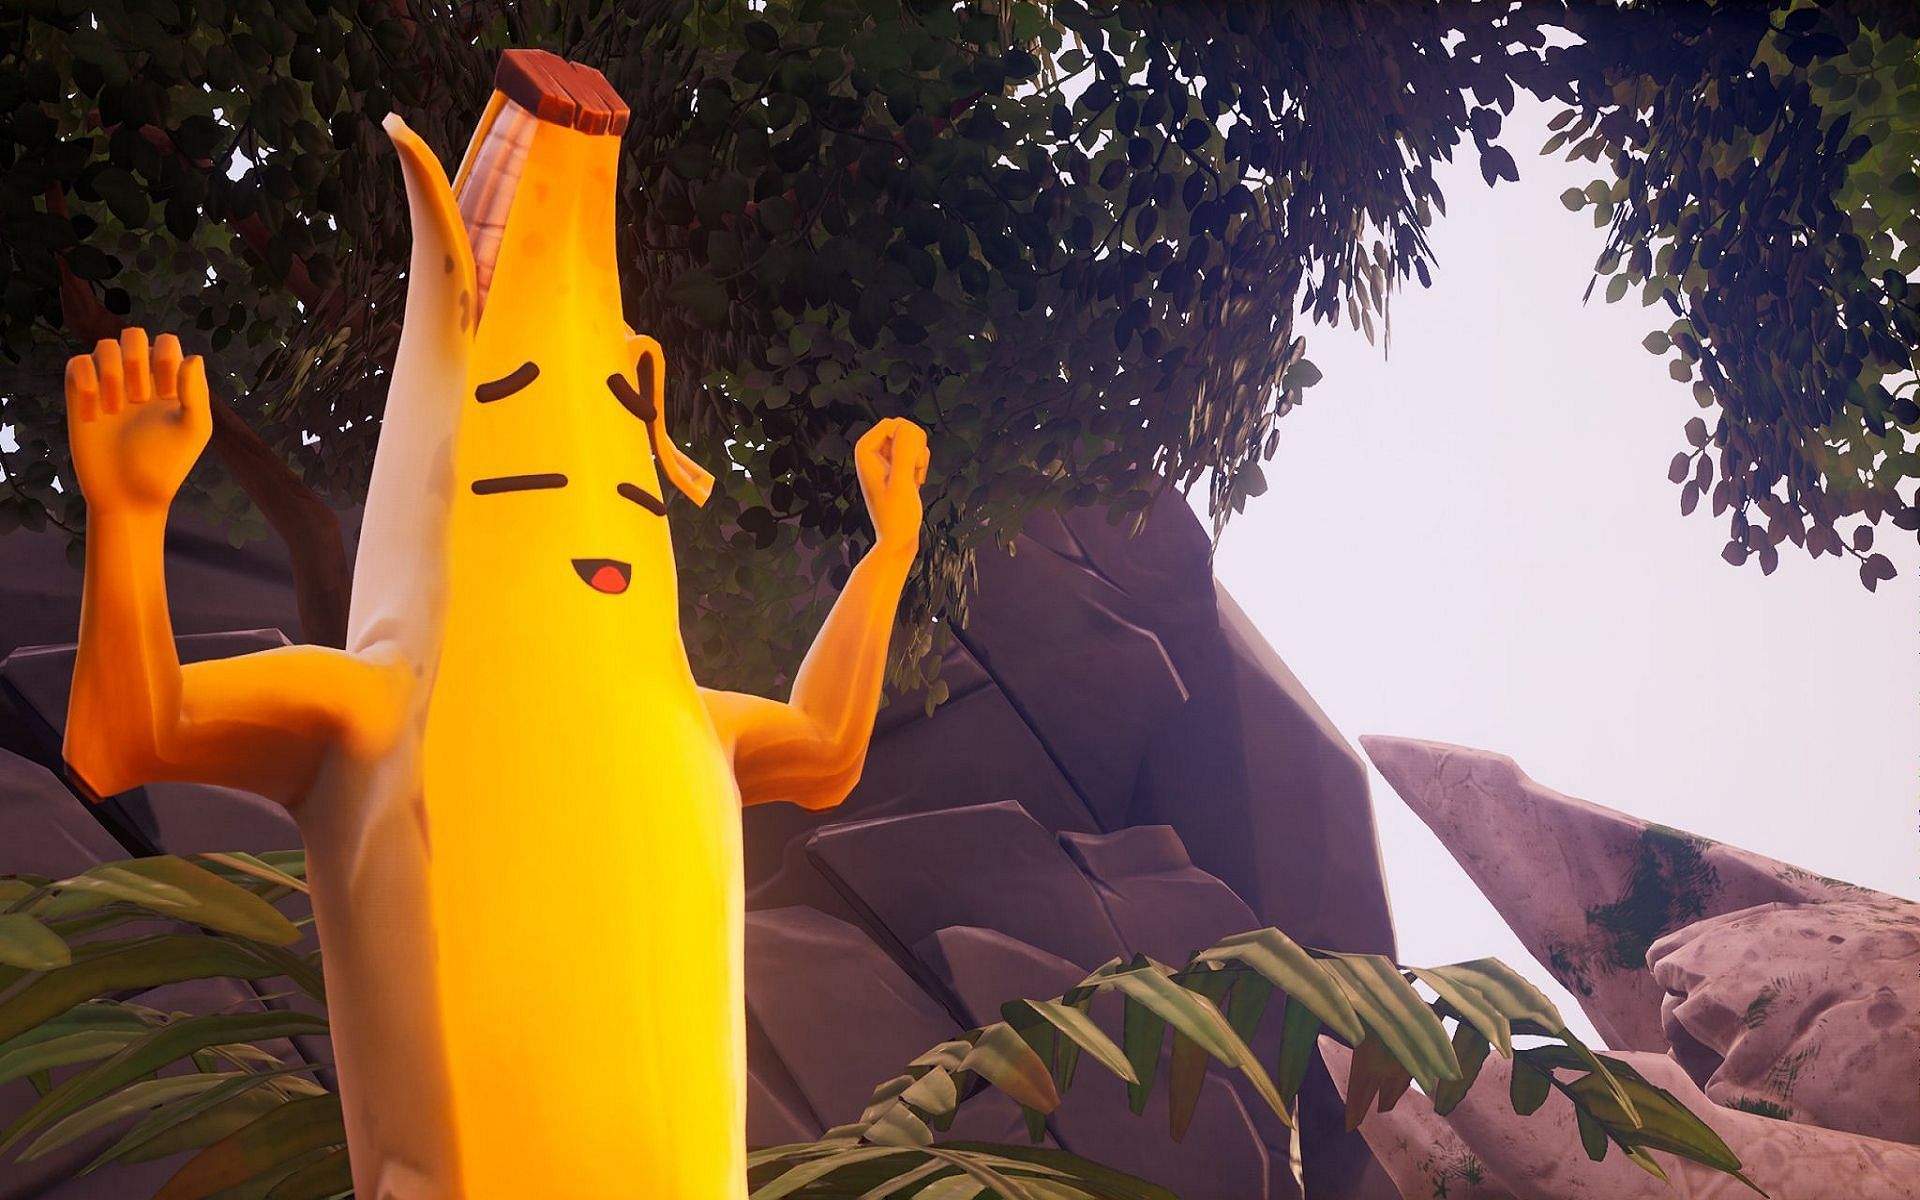 Peely is very excited about the Fortnite 19.40 update, are you? (Image via Twitter/D4rky_TheHybrid)